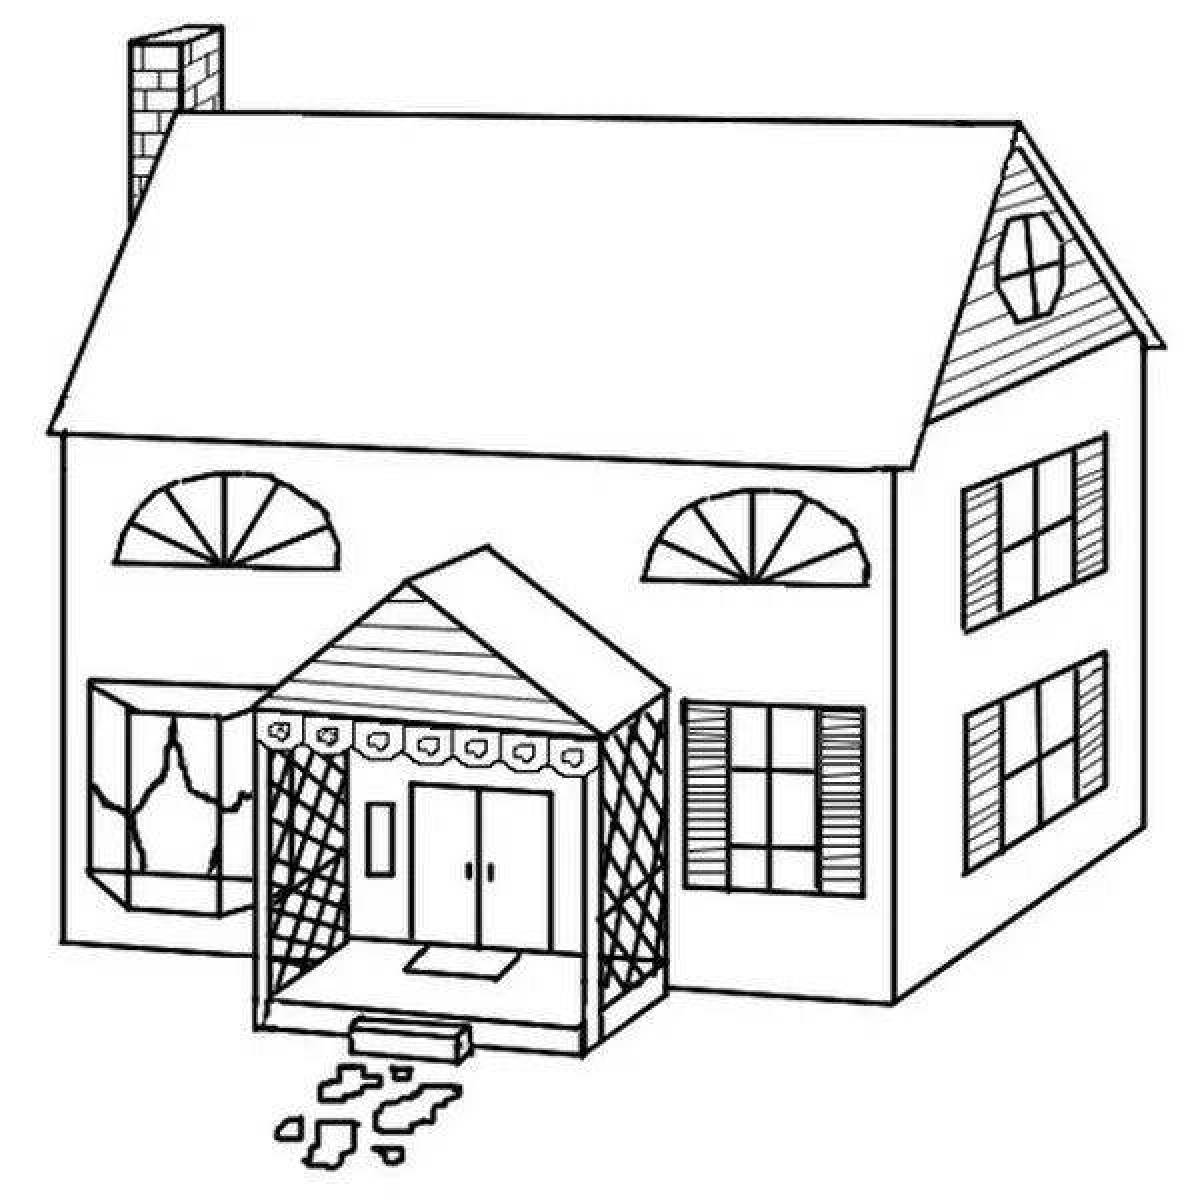 Coloring pages dazzling houses for kids